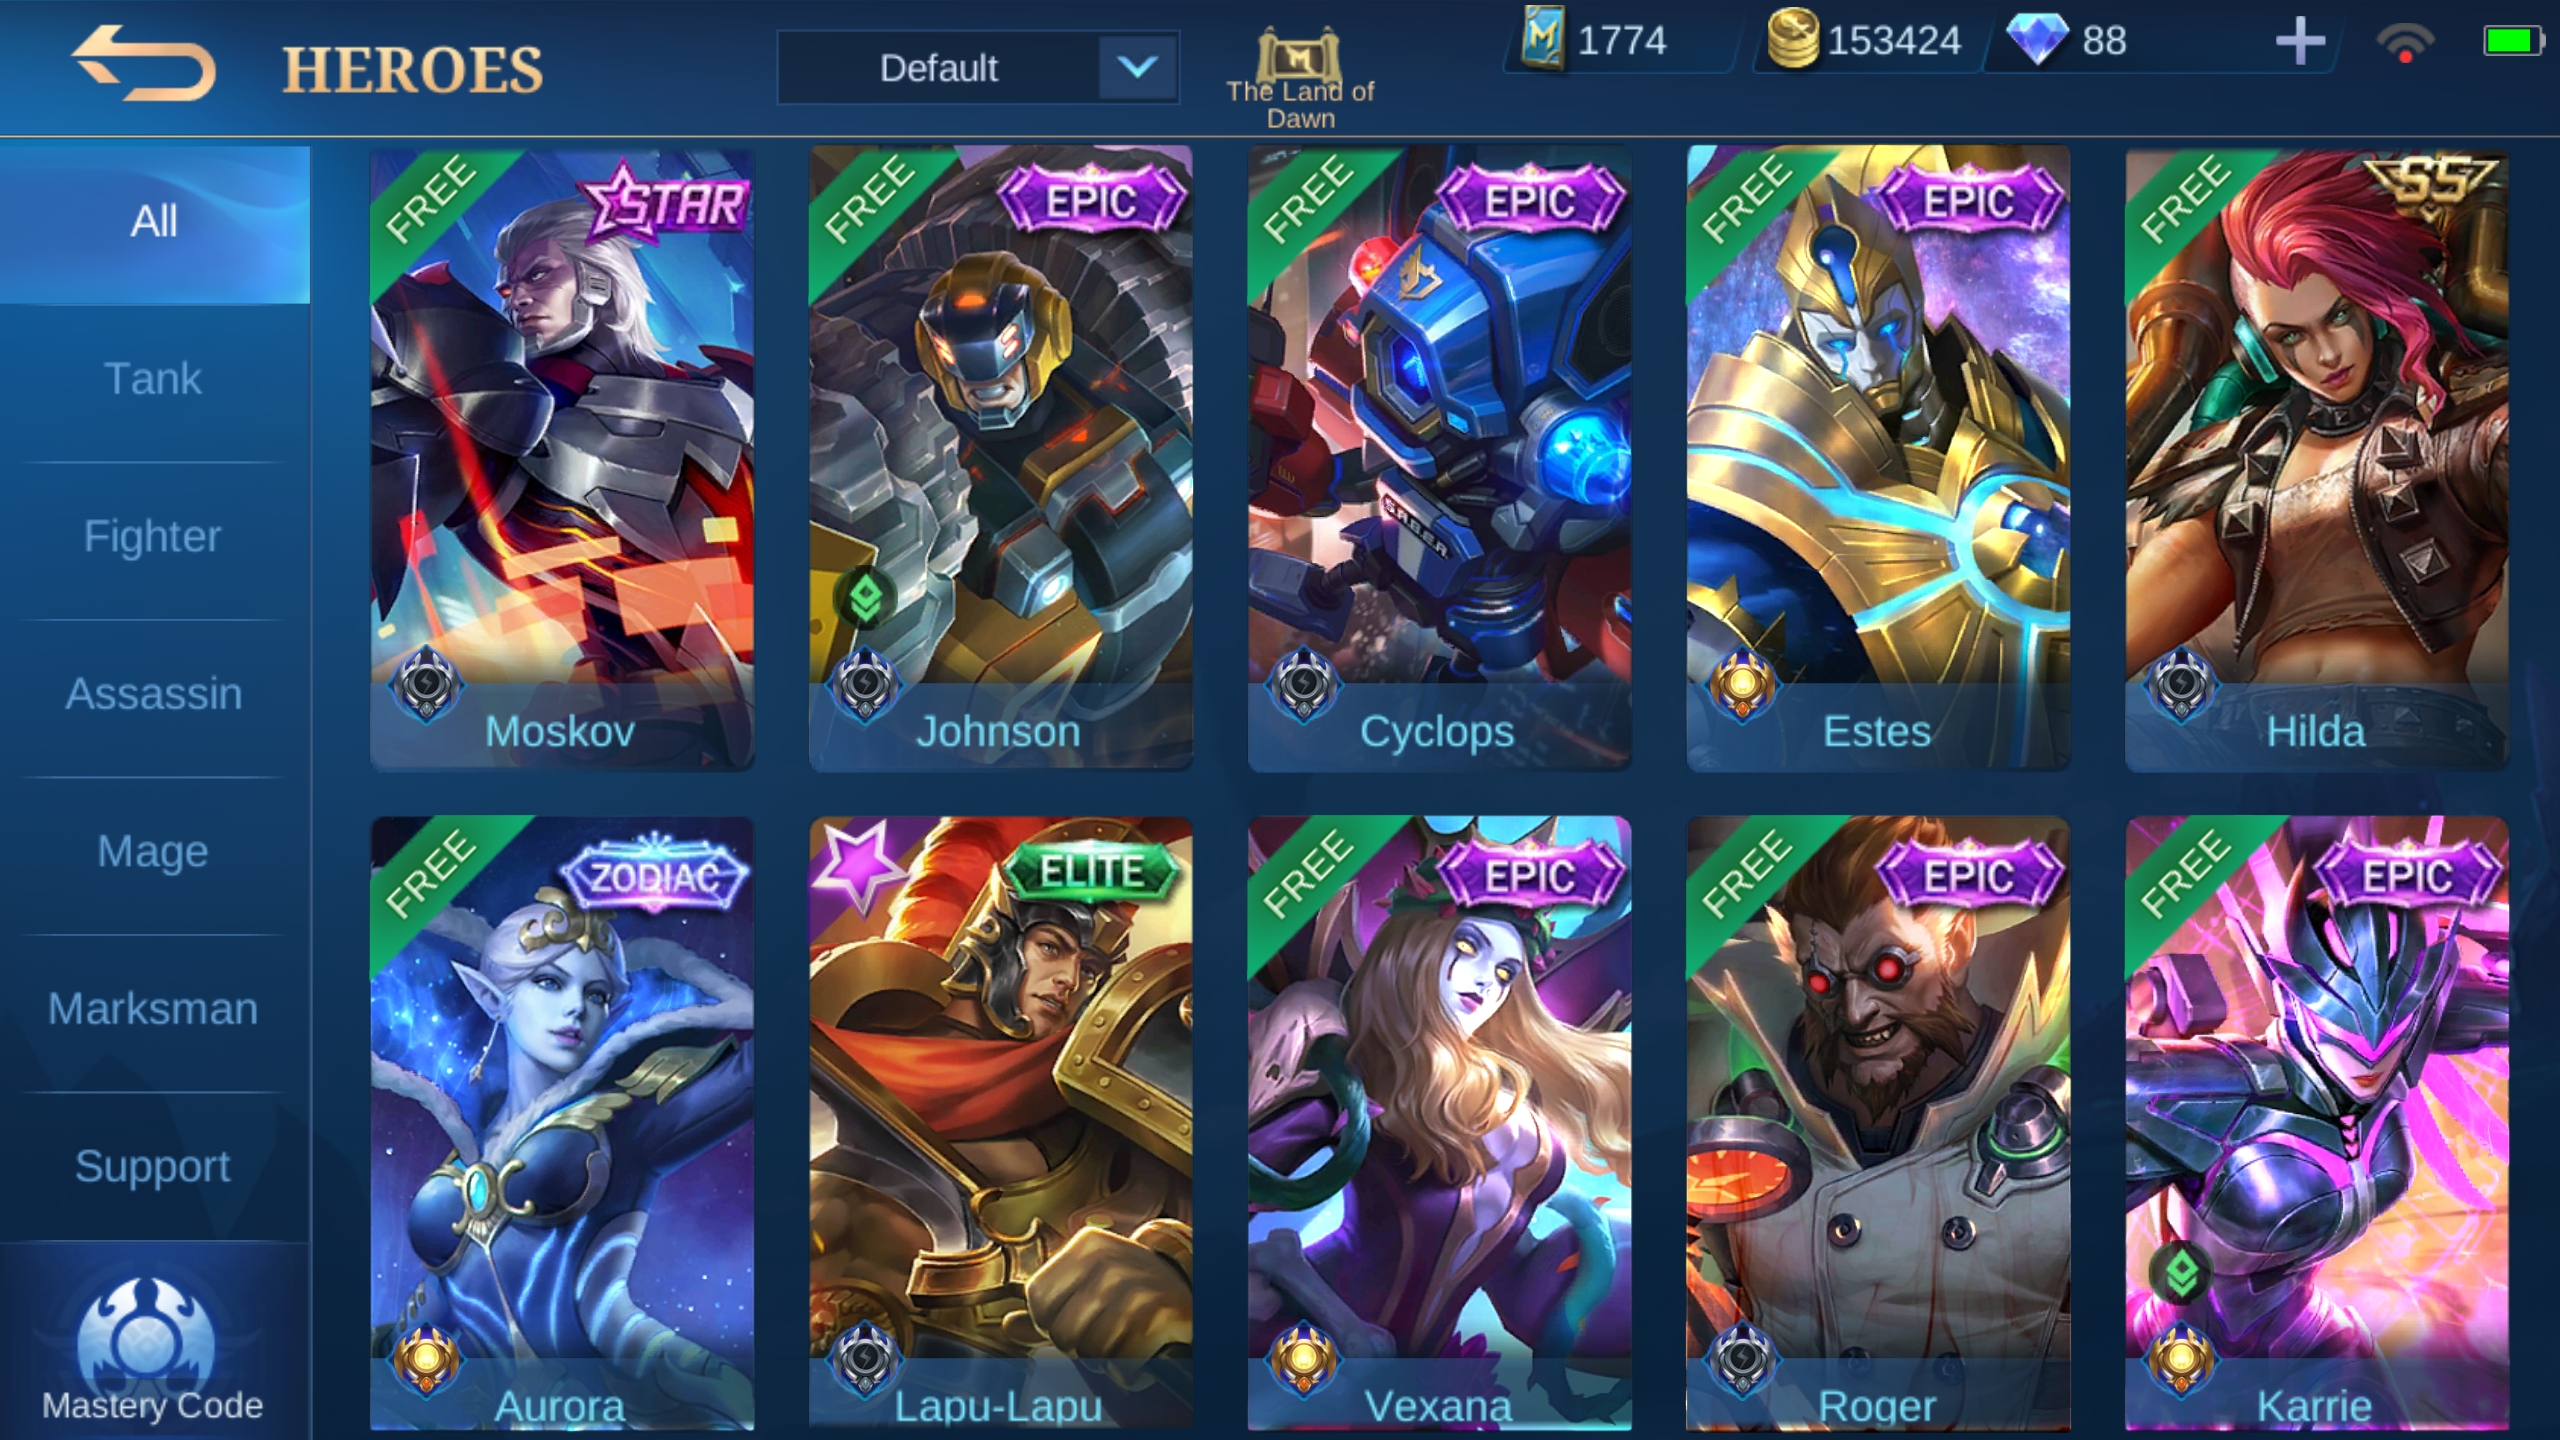 Selling - Mobile Legends Premium Account for Sale - Cheap and